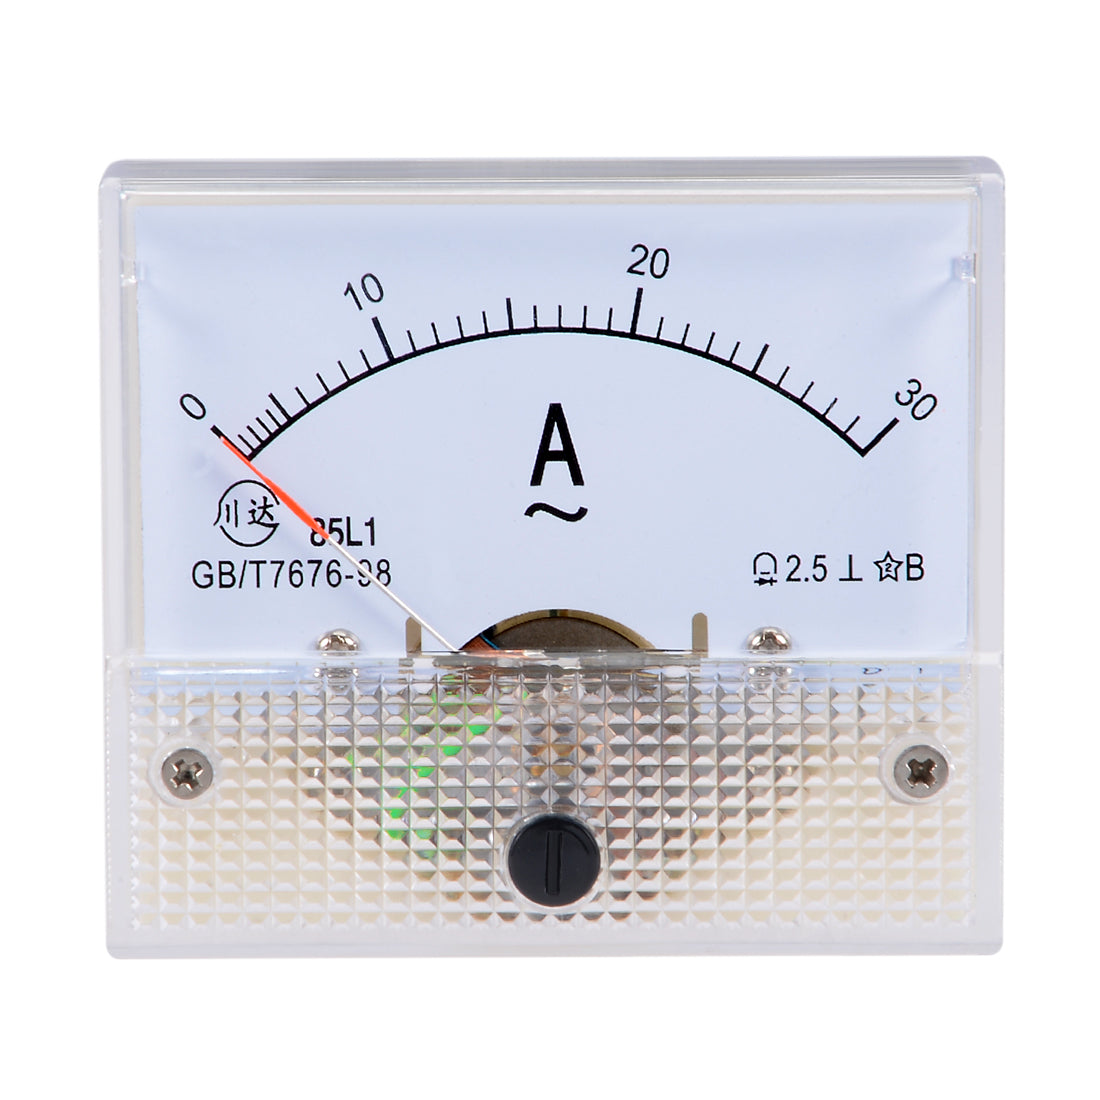 uxcell Uxcell AC 0-30A Analog Panel Ammeter Gauge Ampere Current Meter 85L1